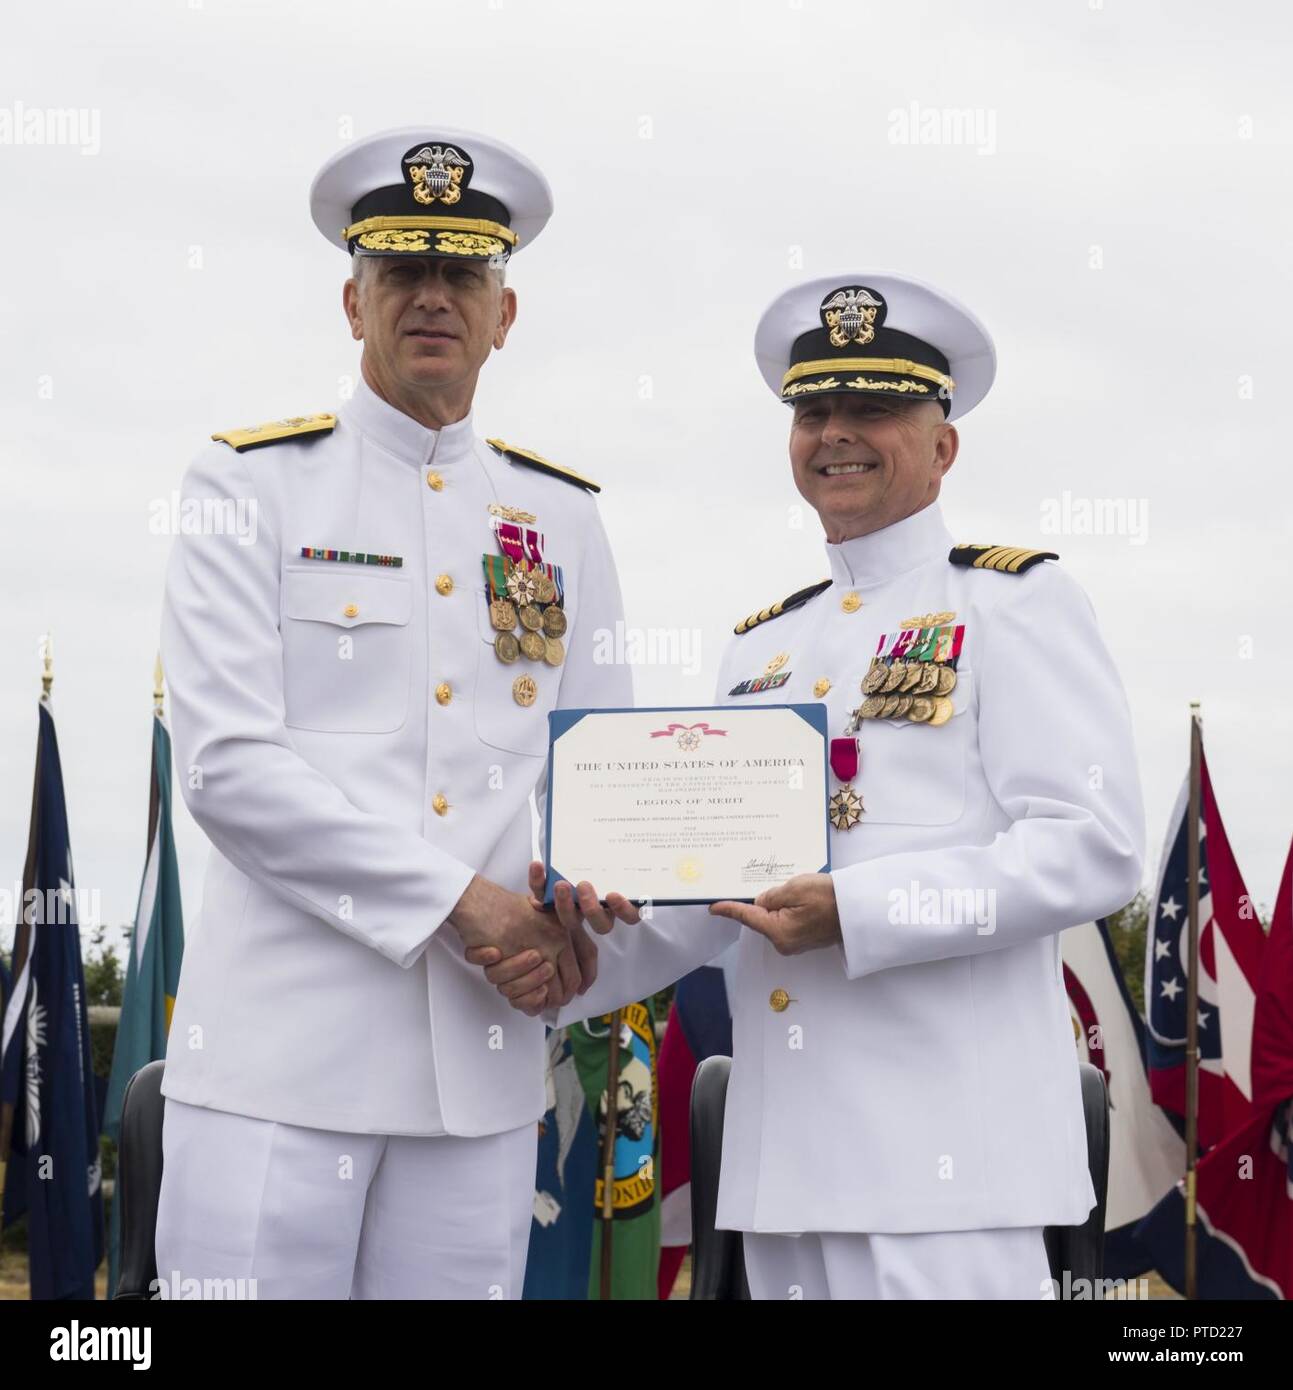 OAK HARBOR, Wash. (July 7, 2017) Rear Adm. Paul Pearigen, commander, Navy Medicine West, presents the Legion of Merit award to Capt. Frederick McDonald during the Naval Hospital Oak Harbor change of command ceremony at Naval Air Station Whidbey Island. Capt. Christine Sears relieved Capt. Frederick McDonald as the commanding officer of Naval Hospital Oak Harbor. Stock Photo